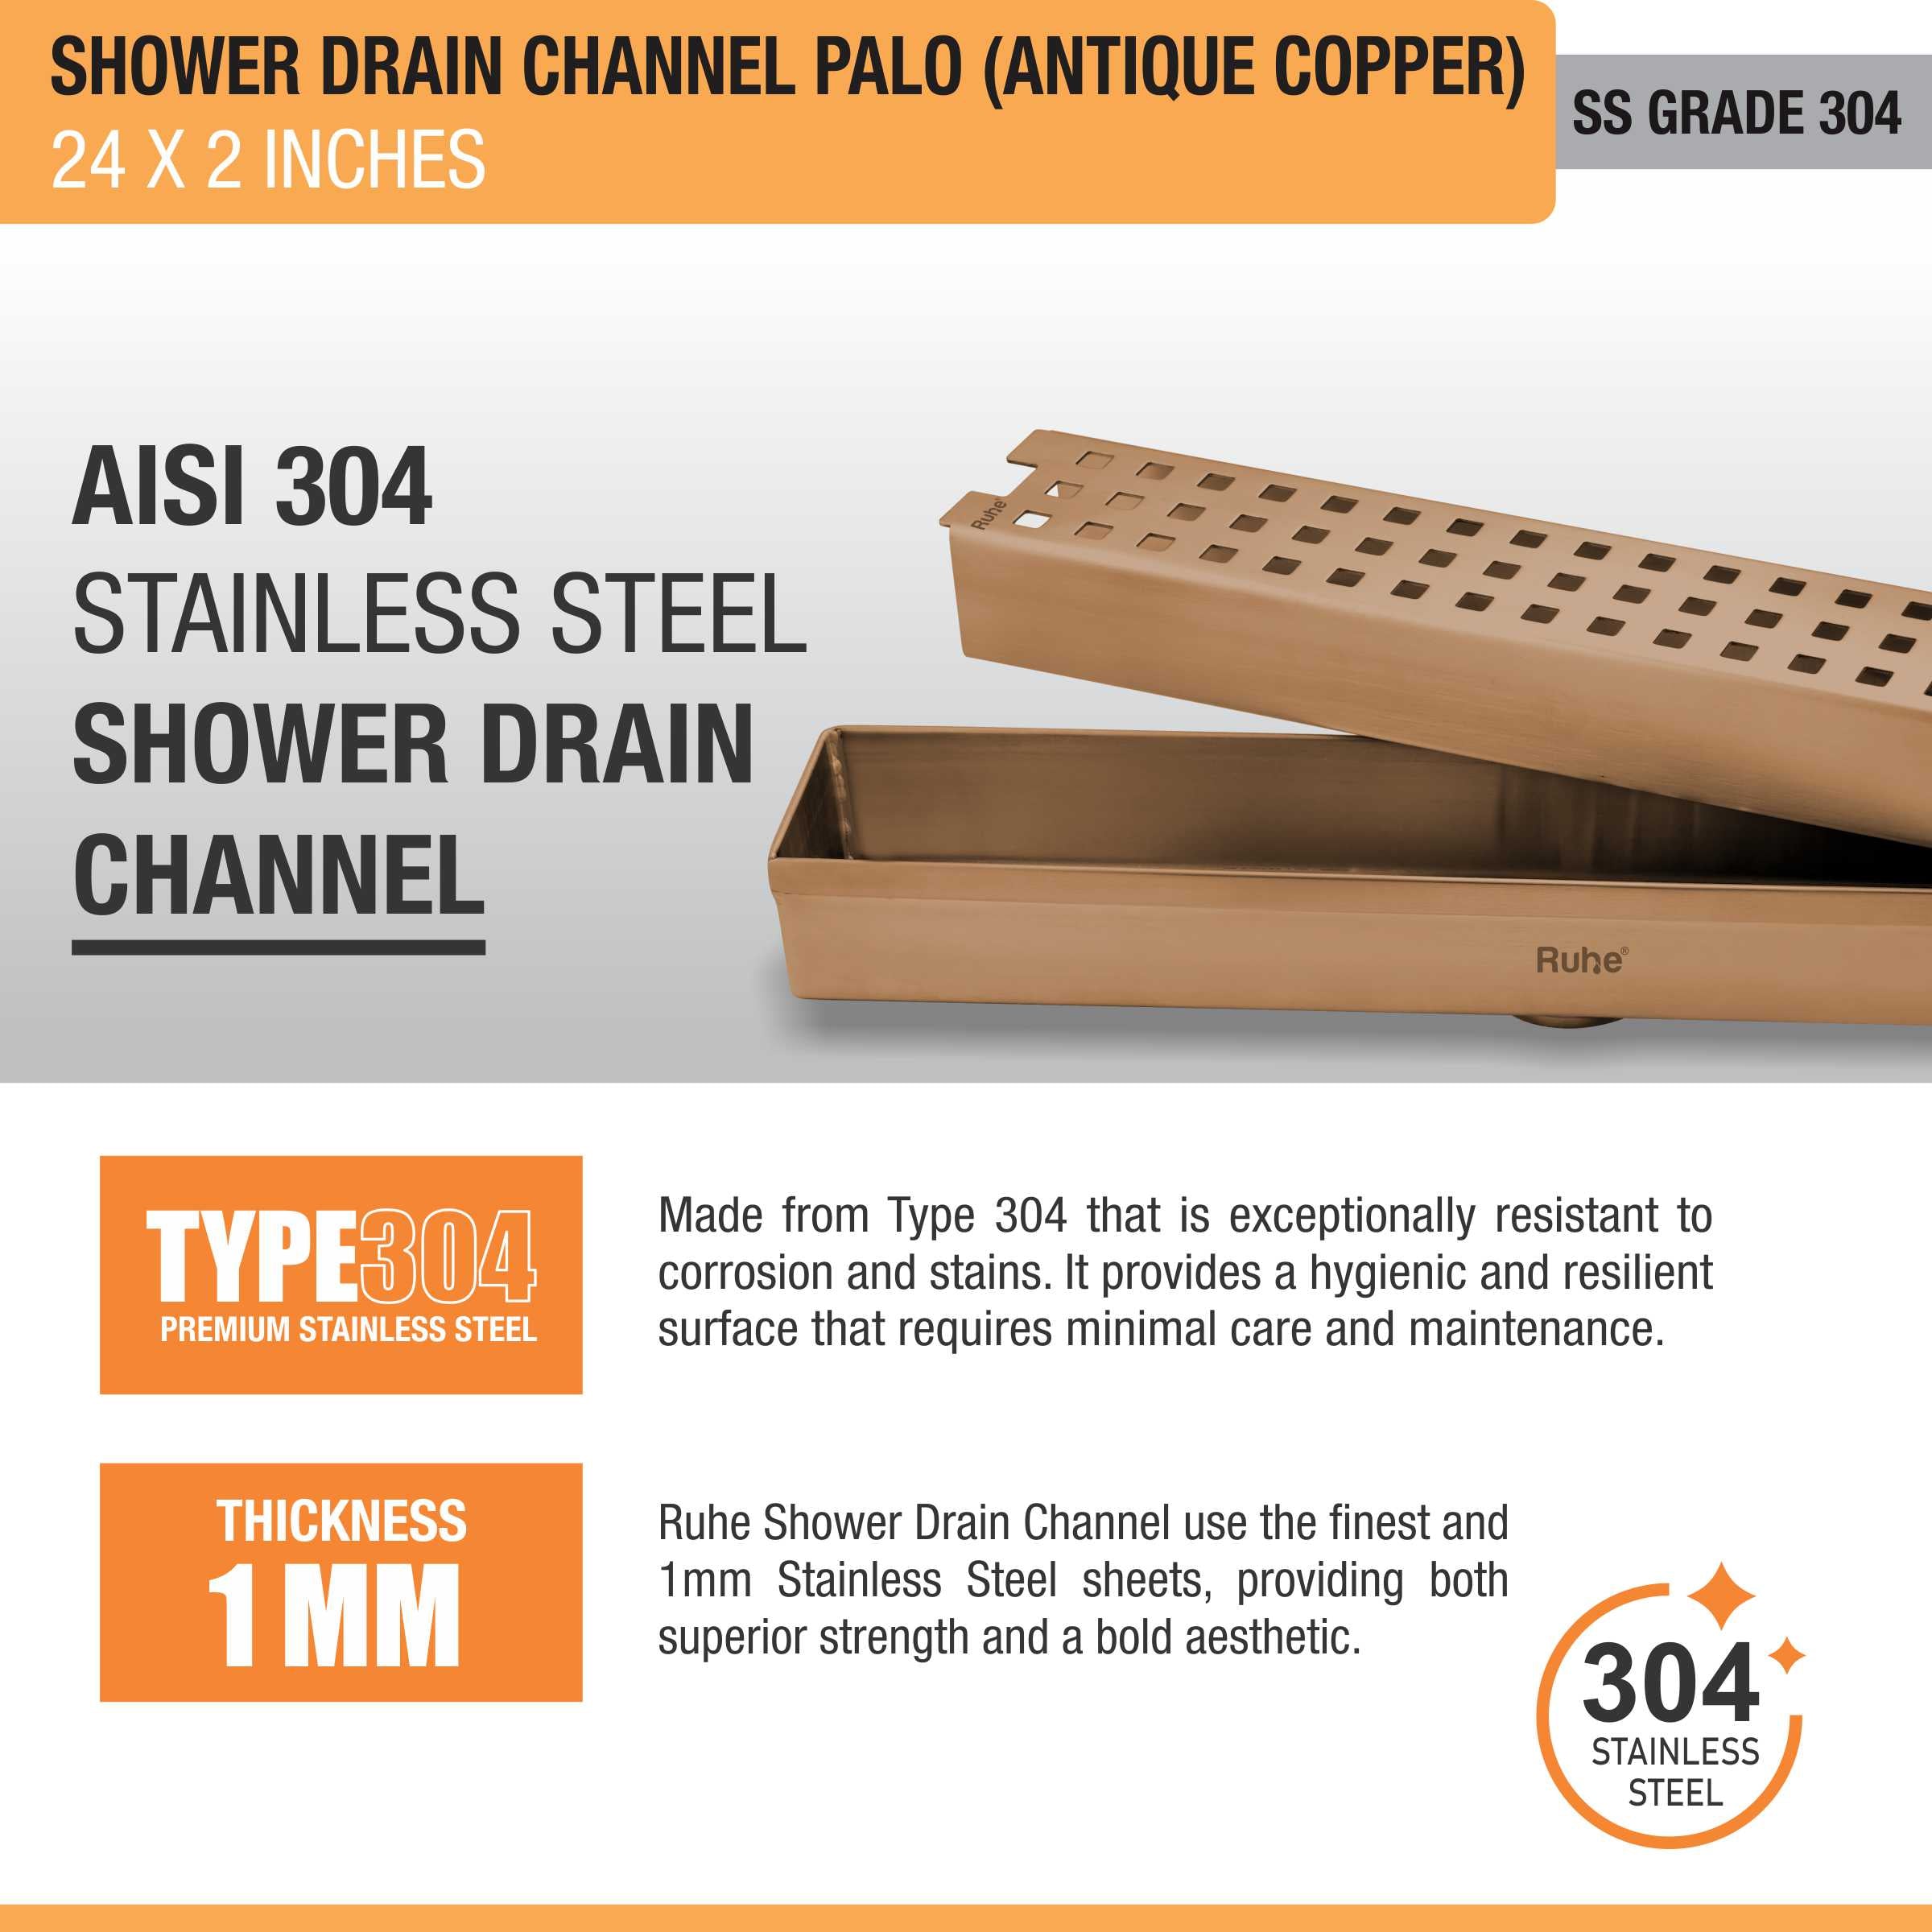 Palo Shower Drain Channel (24 x 2 Inches) ROSE GOLD/ANTIQUE COPPER stainless steel